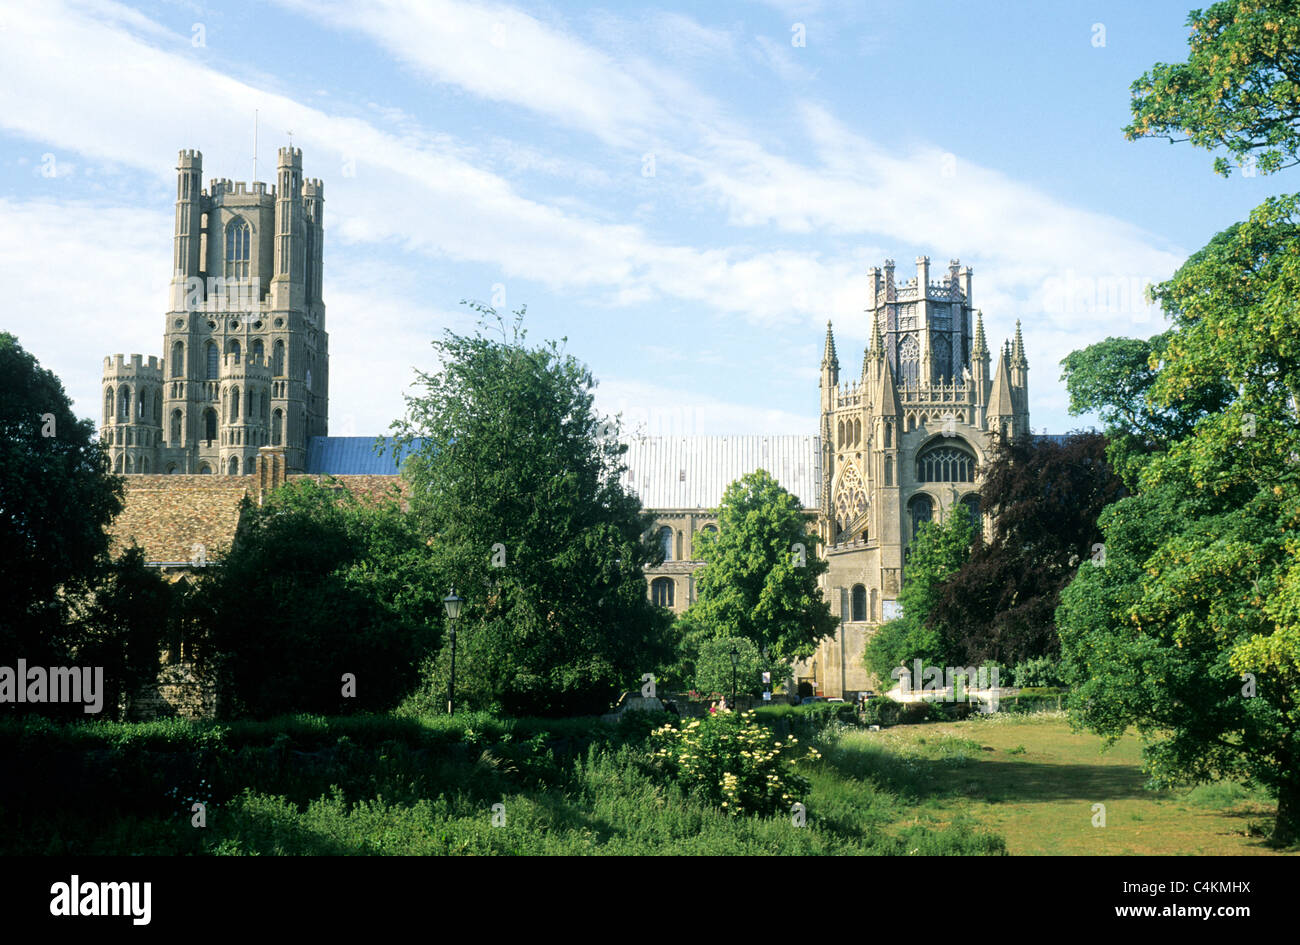 Ely Cathedral, Cambridgeshire England English medieval cathedrals UK west tower octagon and Park towers Stock Photo